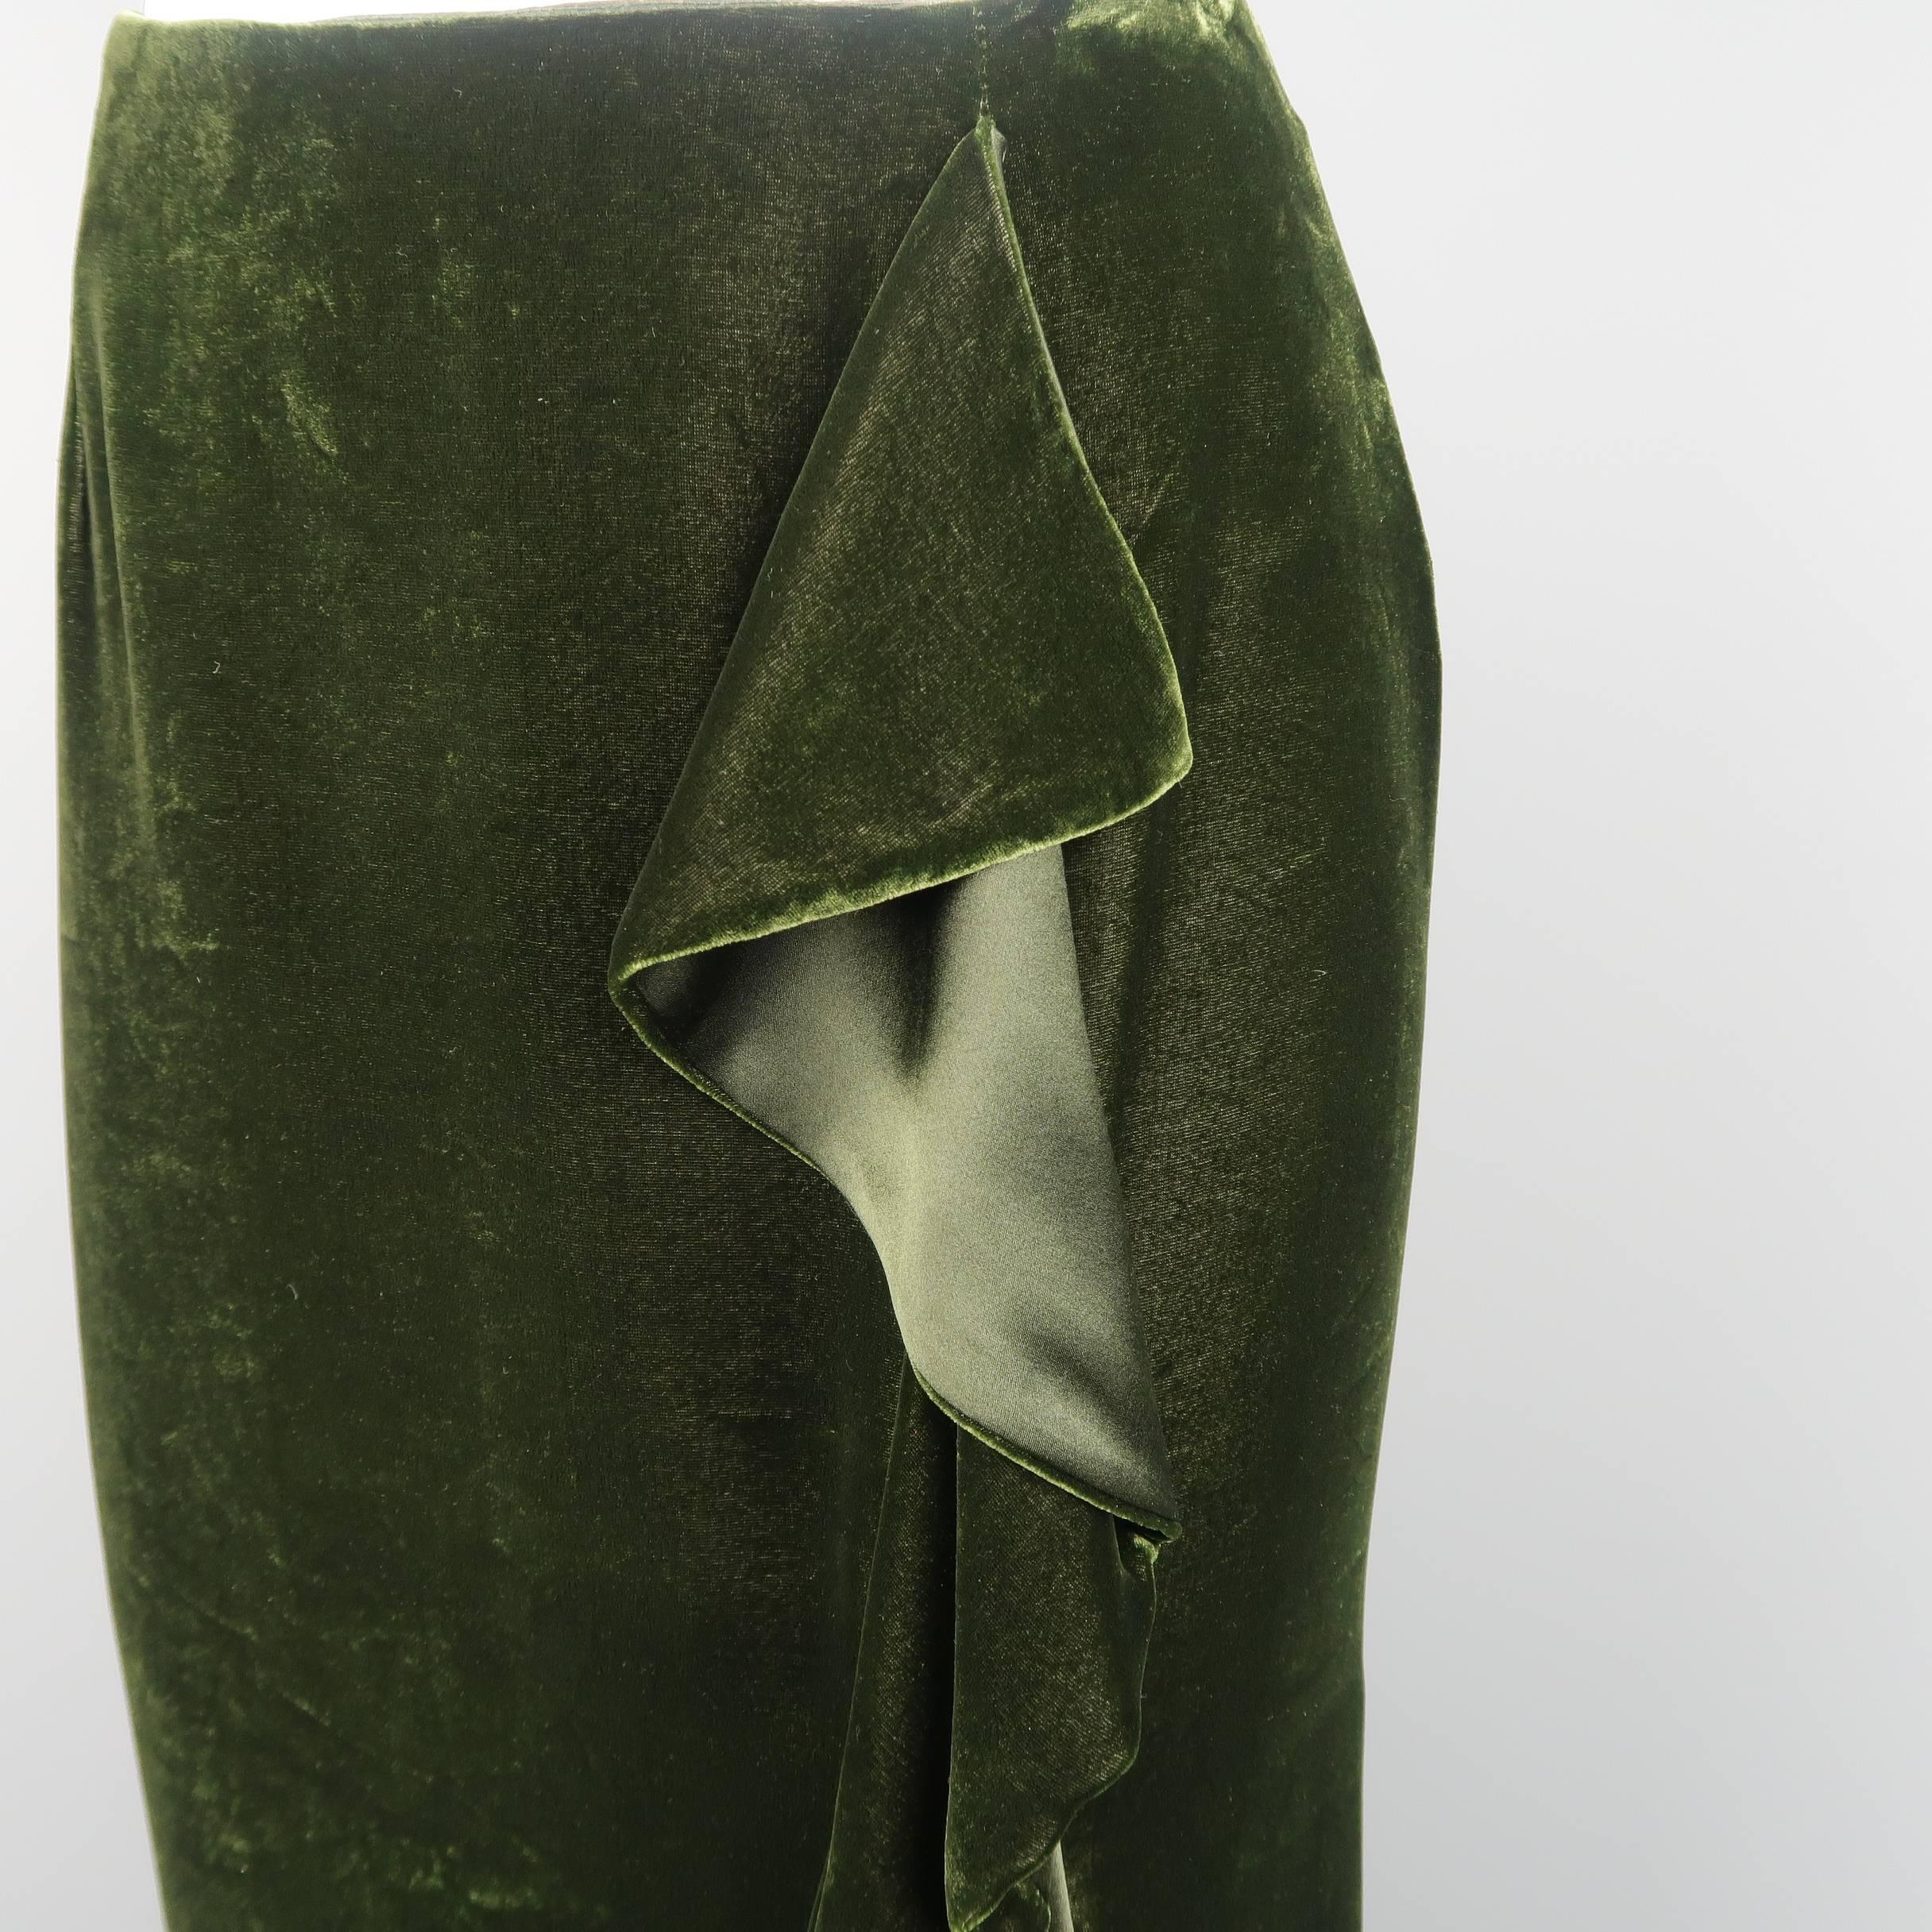 RALPH LAUREN BLACK LABEL A line skirt comes in a deep green silk blend velvet with a cascading ruffle side slit. Minor wear.
 
Good Pre-Owned Condition.
Marked: 8
 
Measurements:
 
Waist: 31 in.
Hip: 39 in.
Length: 25 in.
